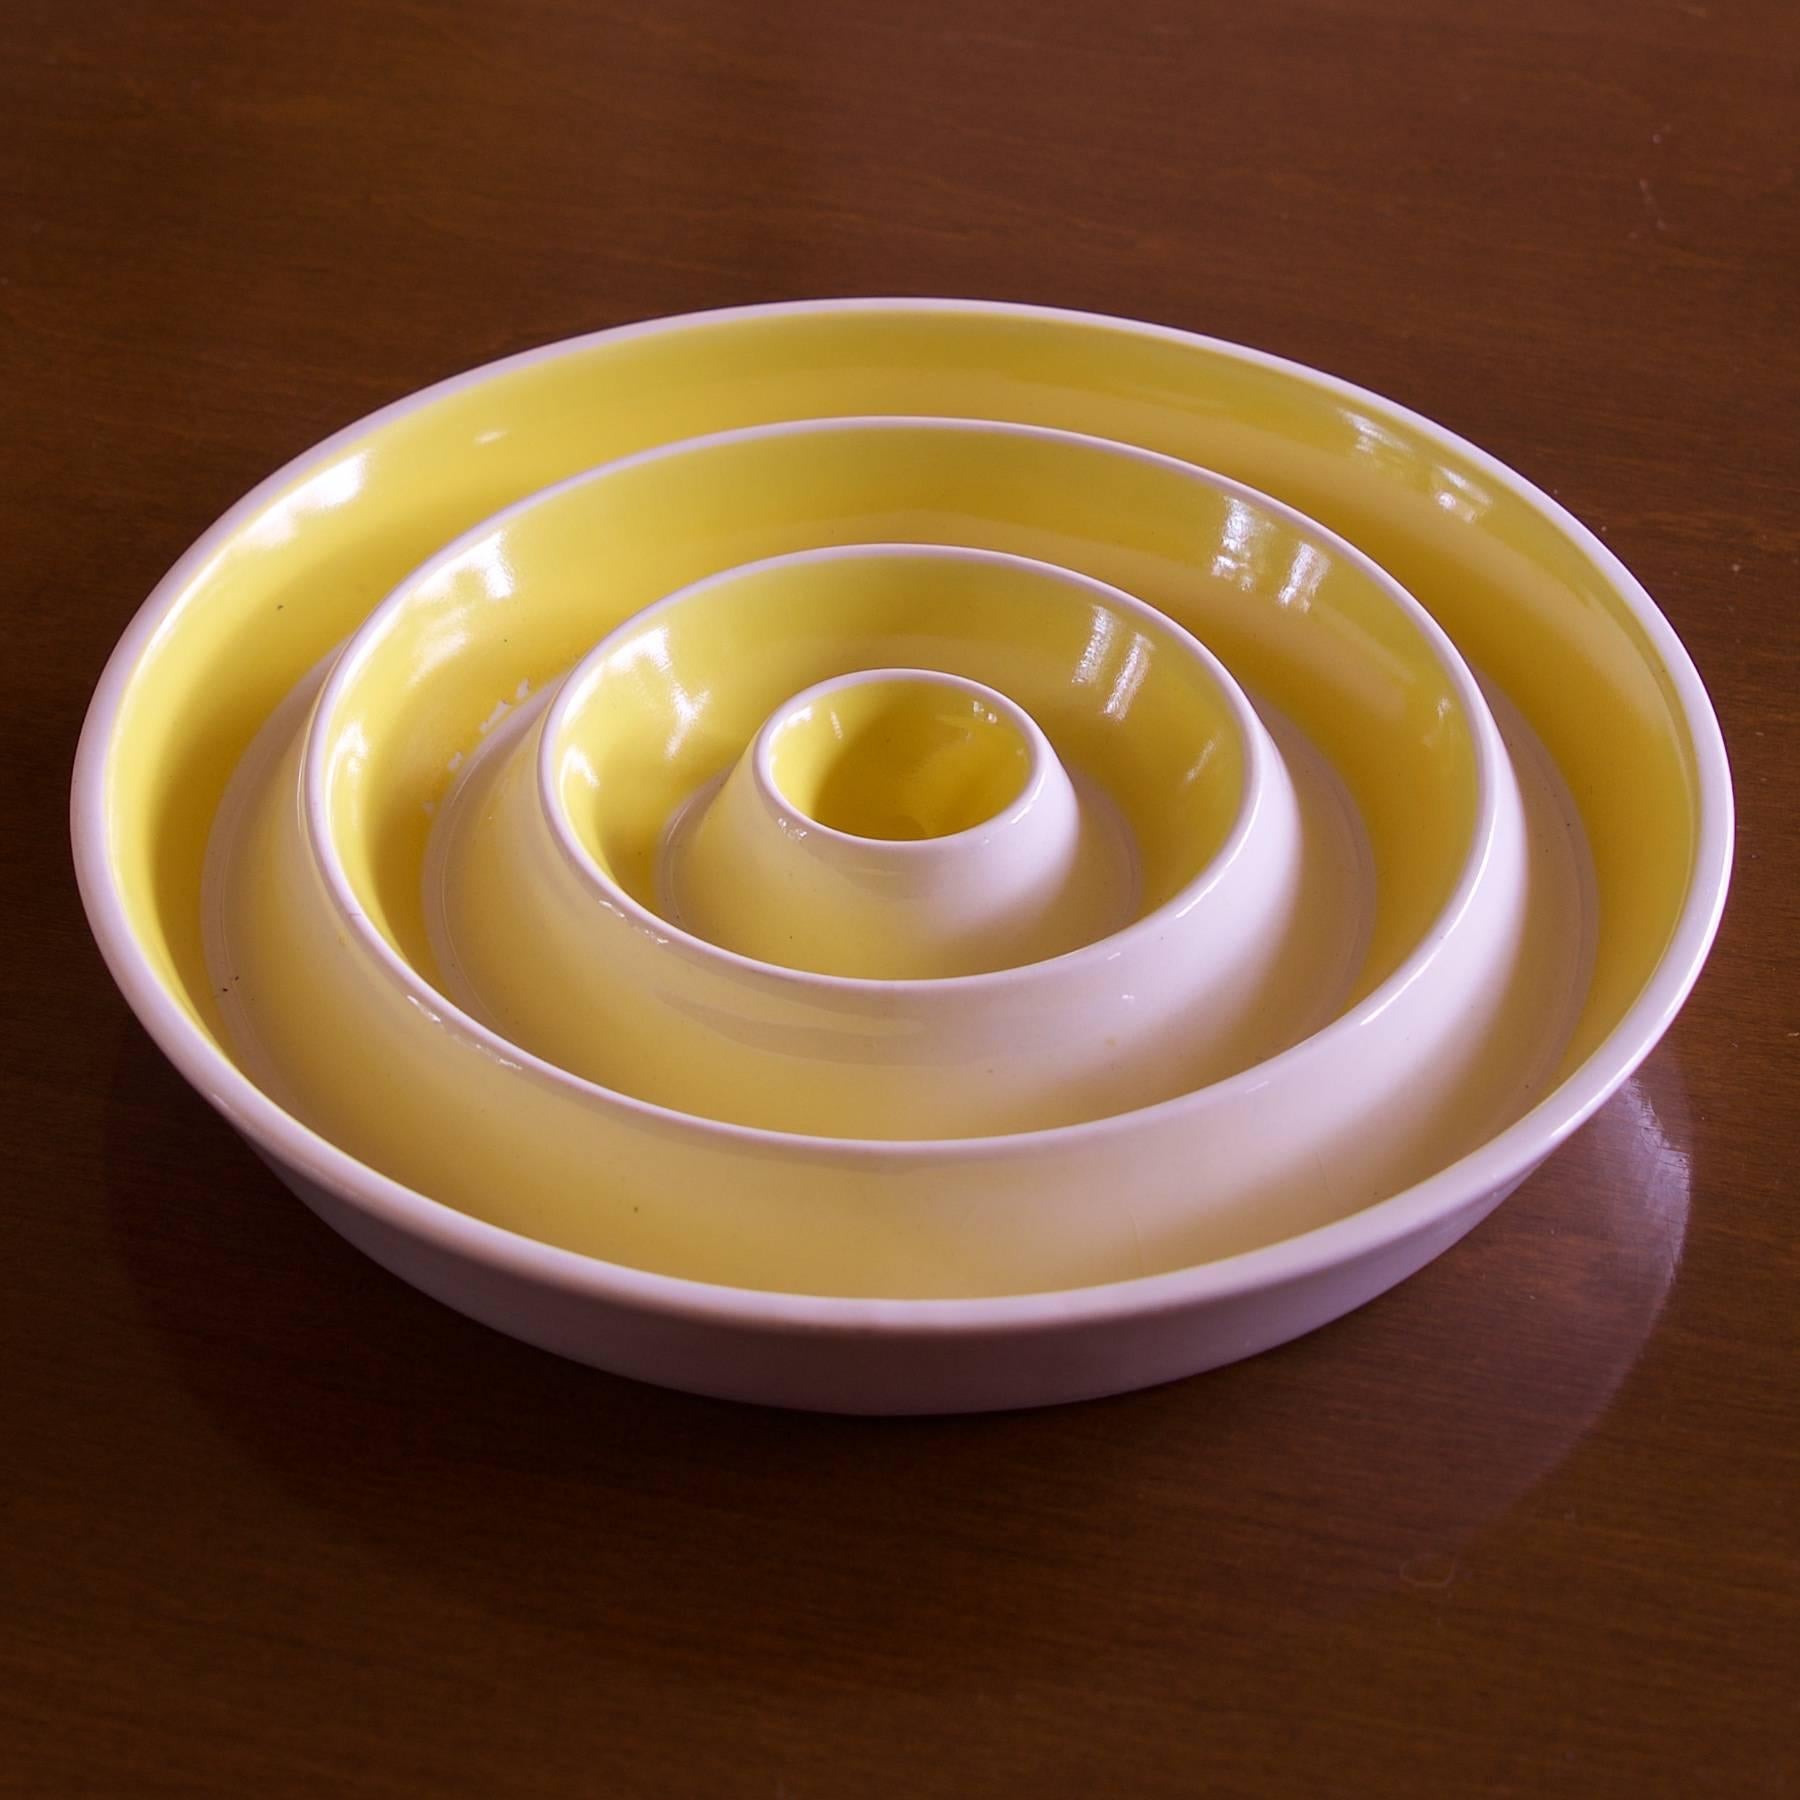 Porcelain ashtray designed by La Gardo Tackett (1911-1992). Best known as the head designer for Architectural Pottery, in Los Angeles, California.